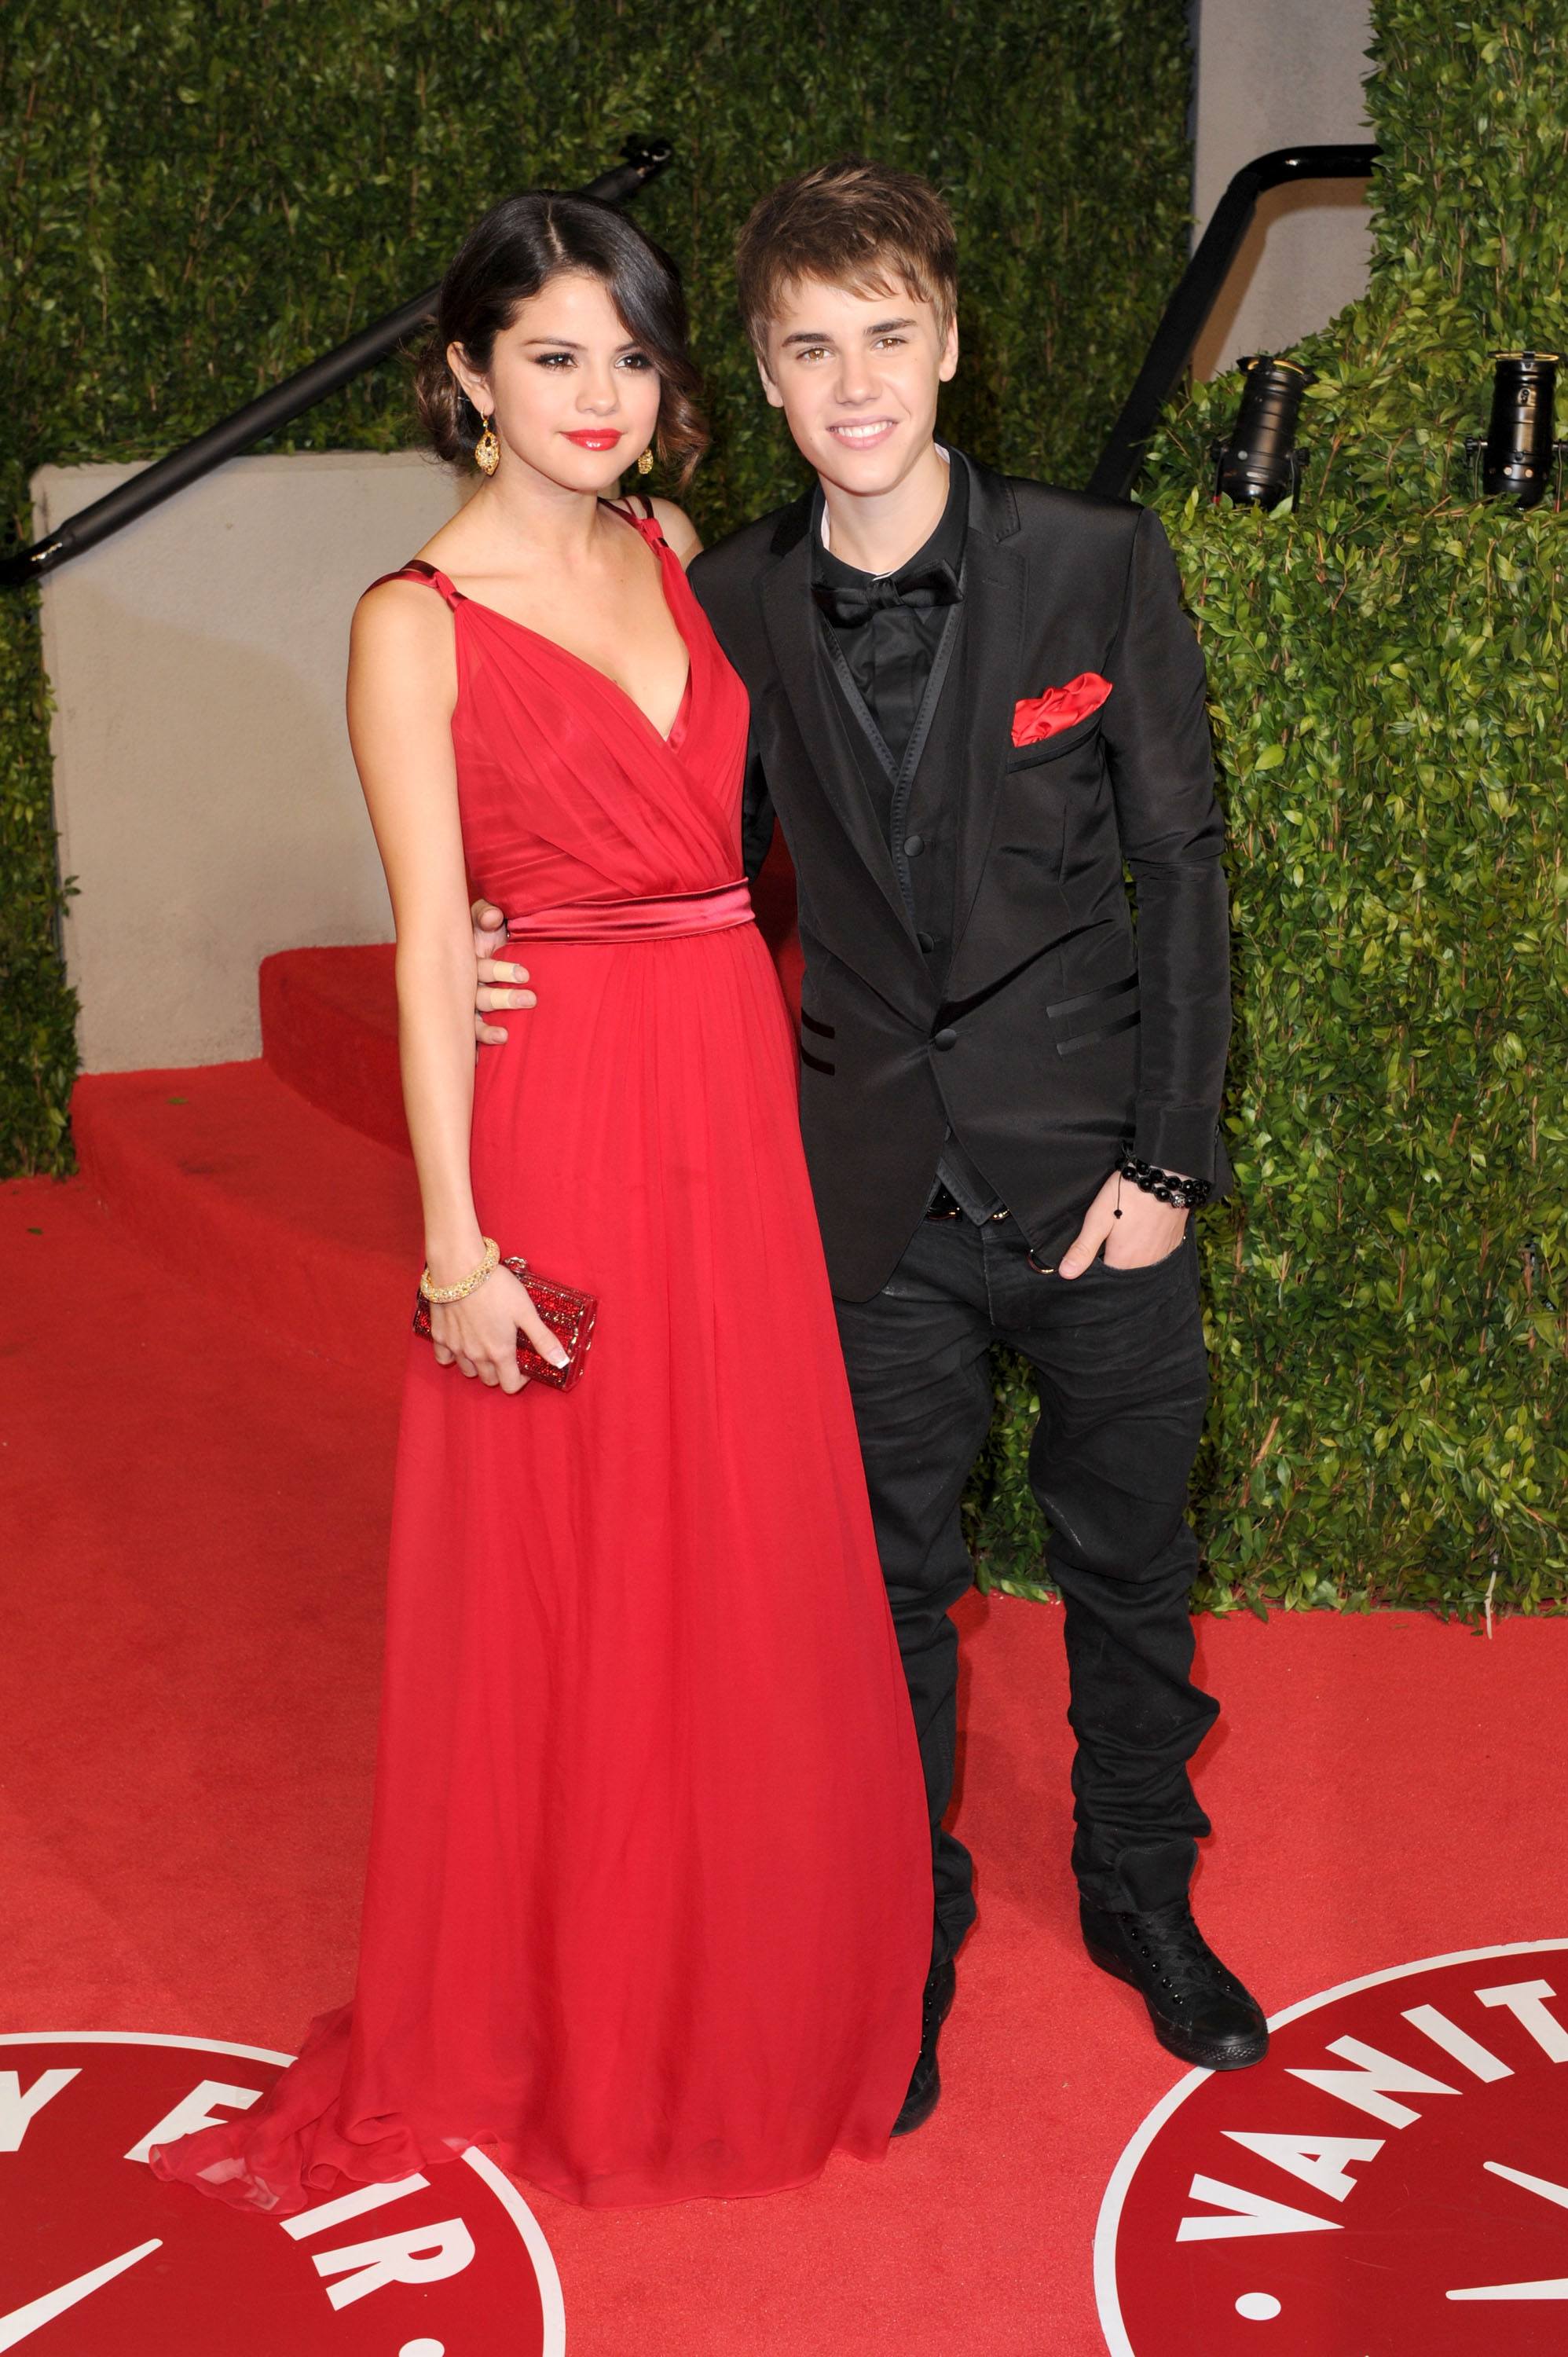 Here’s the Heartbreaking Reaction Justin Bieber Had After Learning Selena Gomez Was Hospitalized